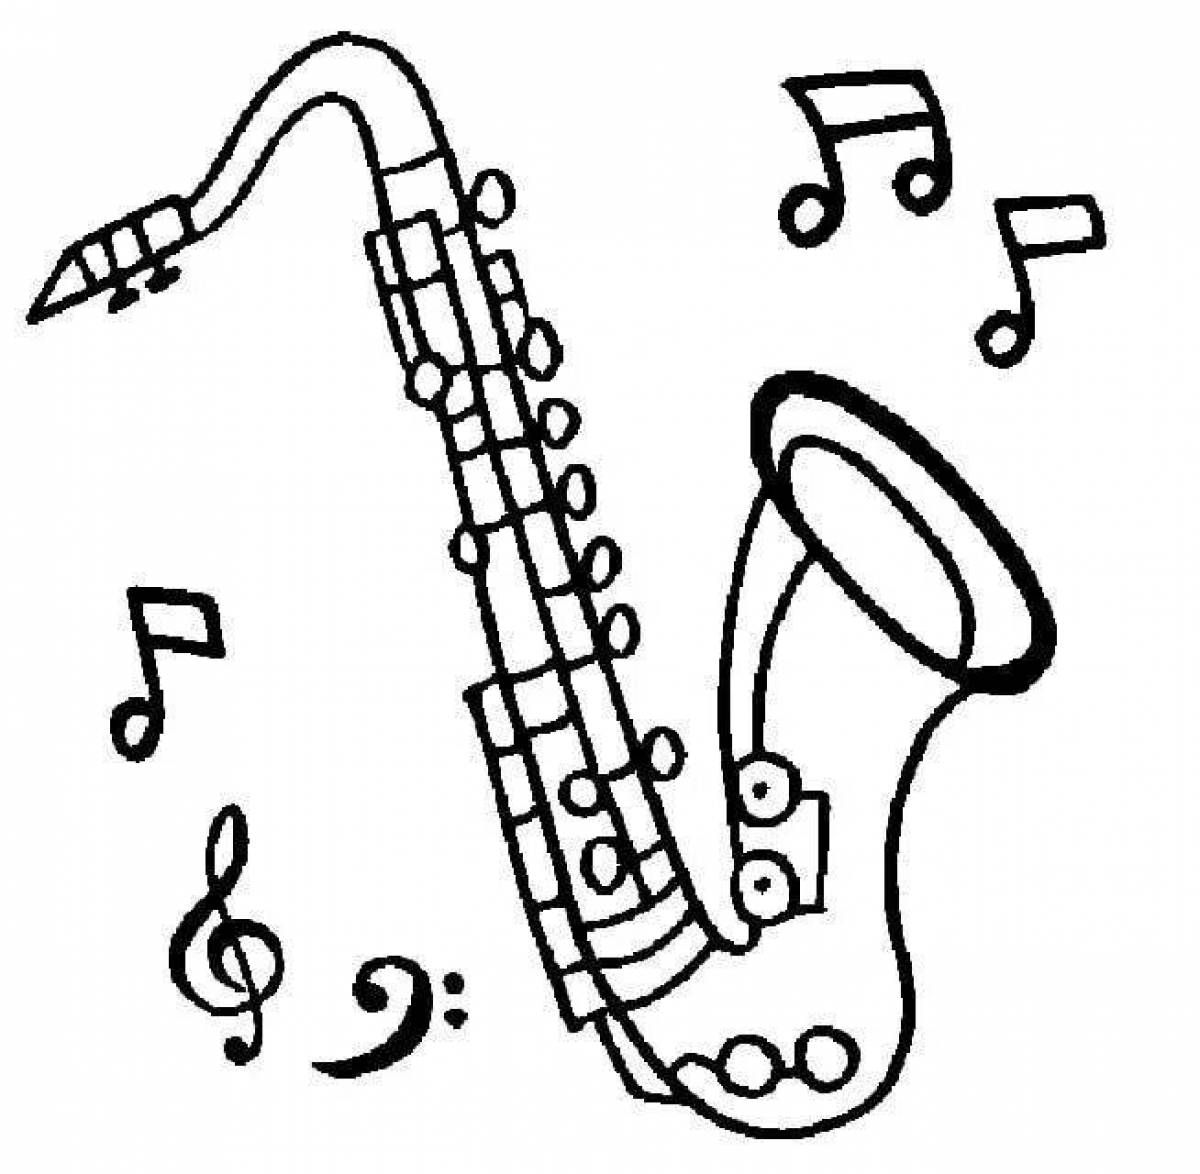 Great coloring of the saxophone